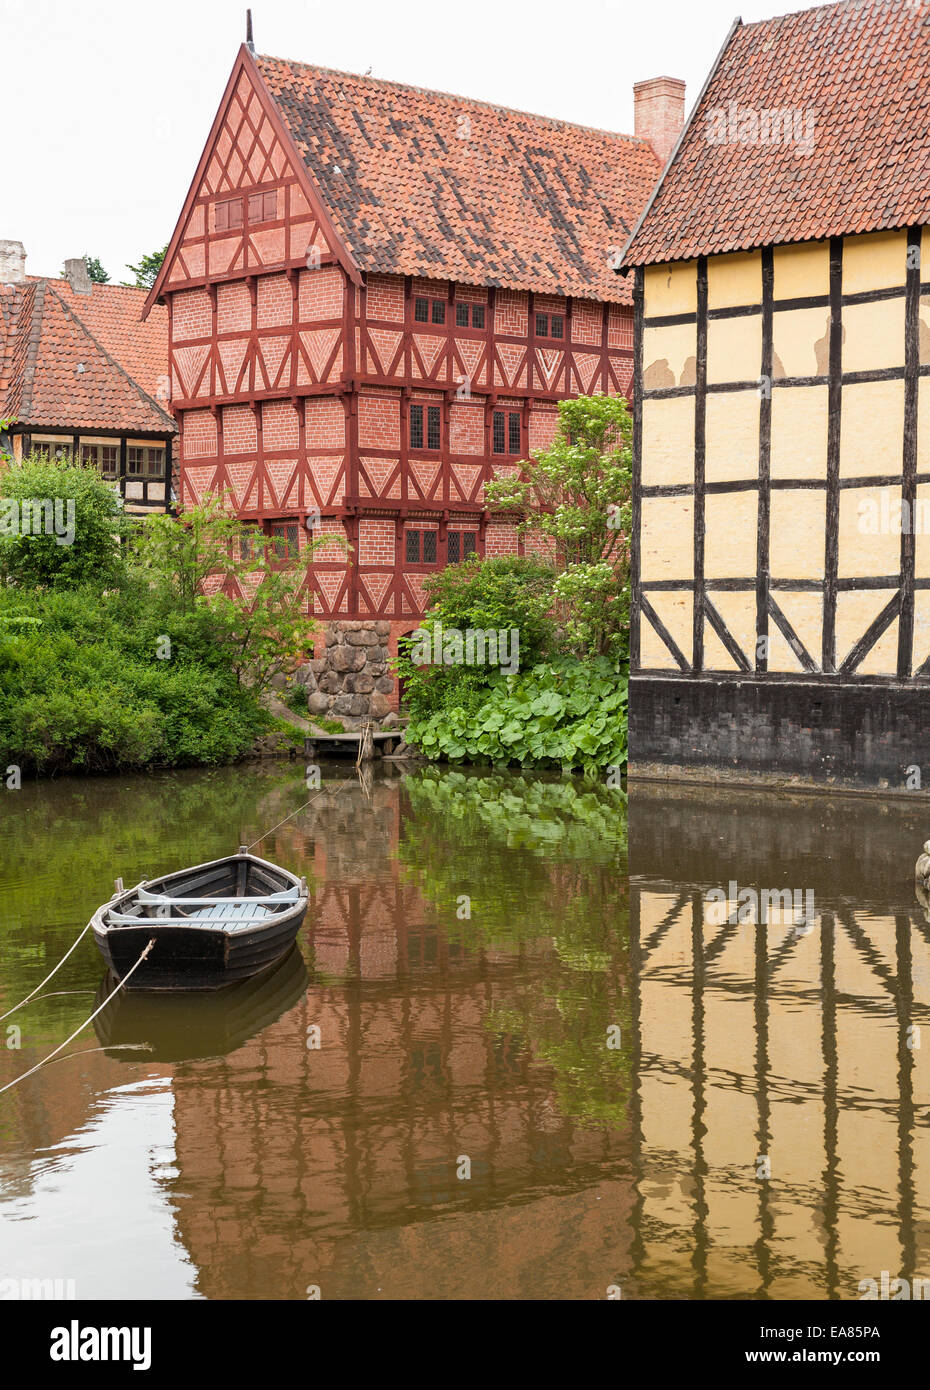 Half Timbered houses of old Aarhus. A small row boat is anchored in the calm water in front of traditional Danish river houses Stock Photo